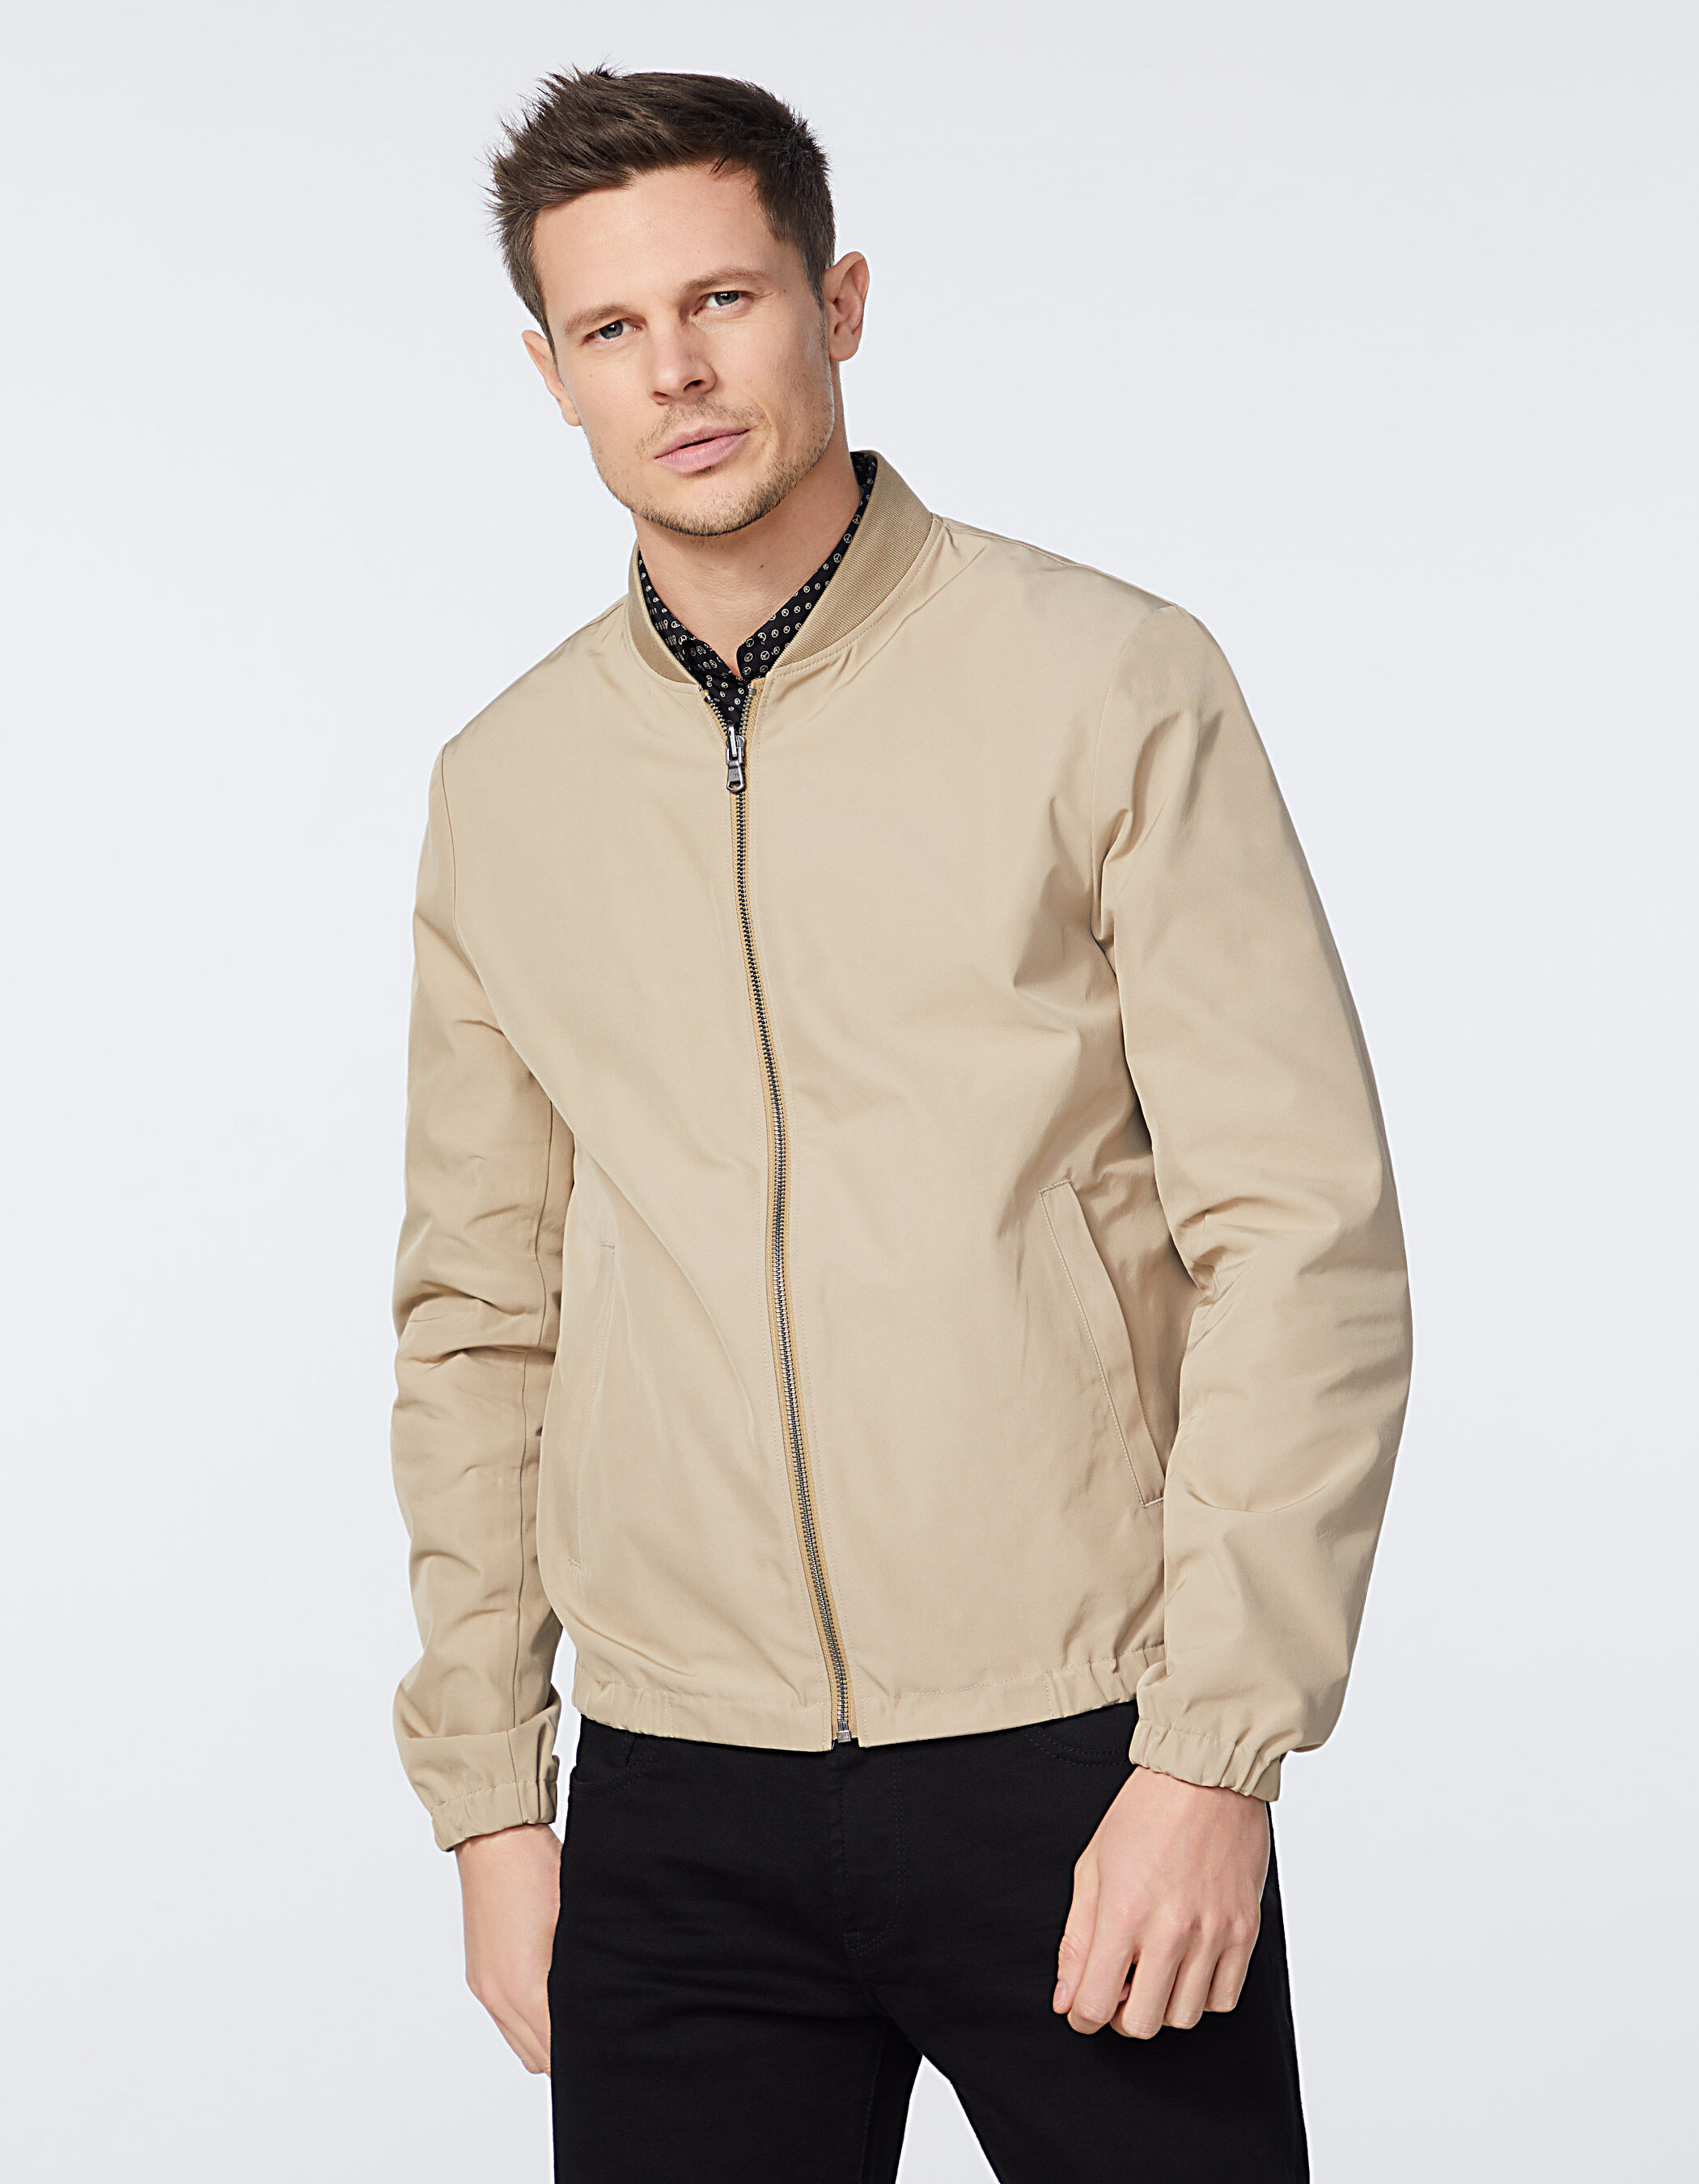 Beige Padded Bomber Jacket by Acne Studios on Sale